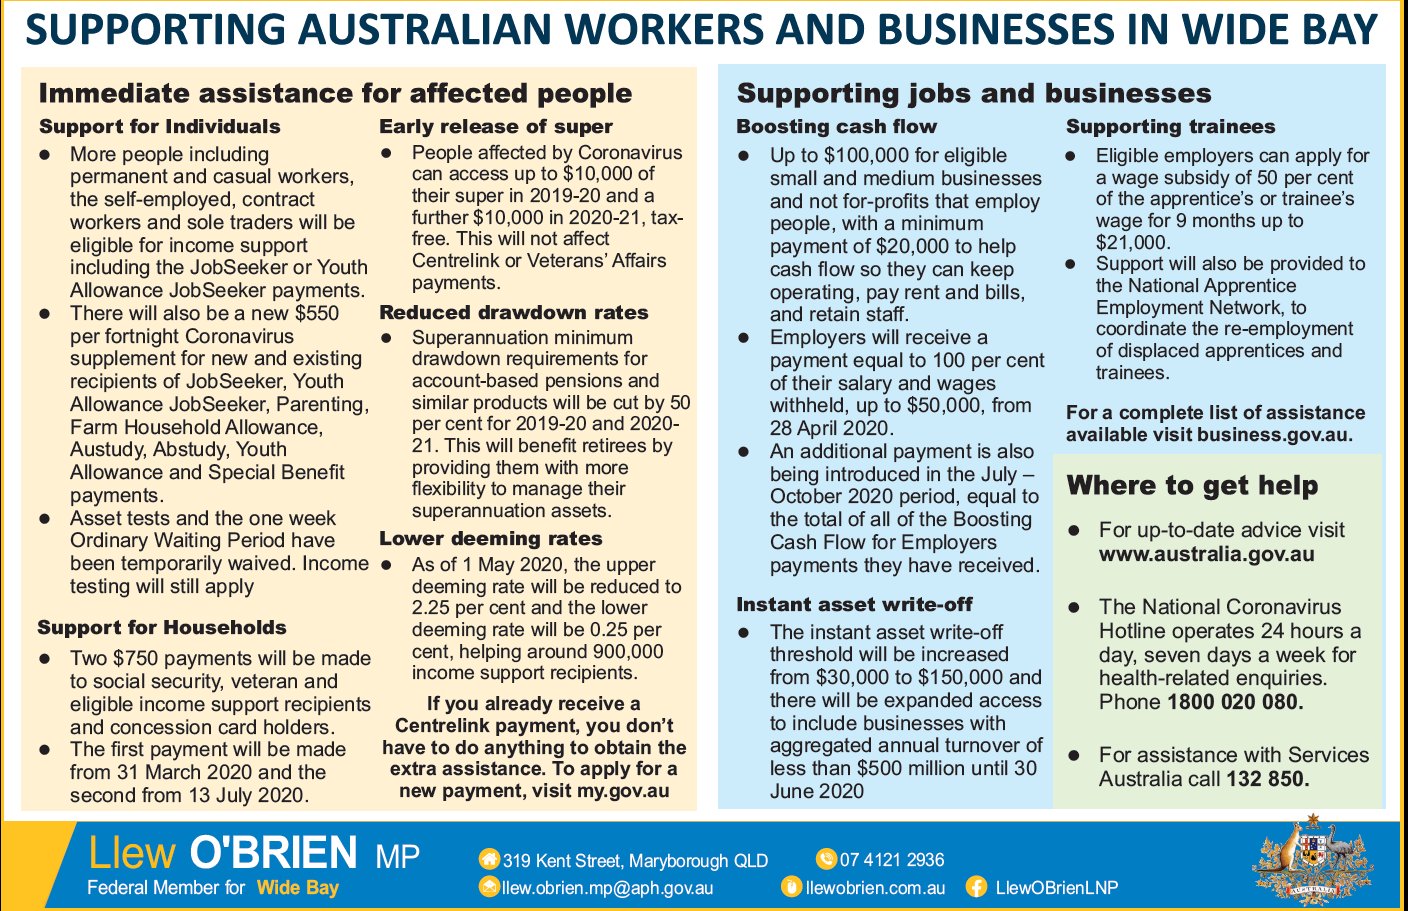 Supporting Australian Workers & Business in Wide Bay - Authorised by Llew O’Brien, Liberal National Party of Queensland, 319 Kent Street Maryborough QLD 4650 